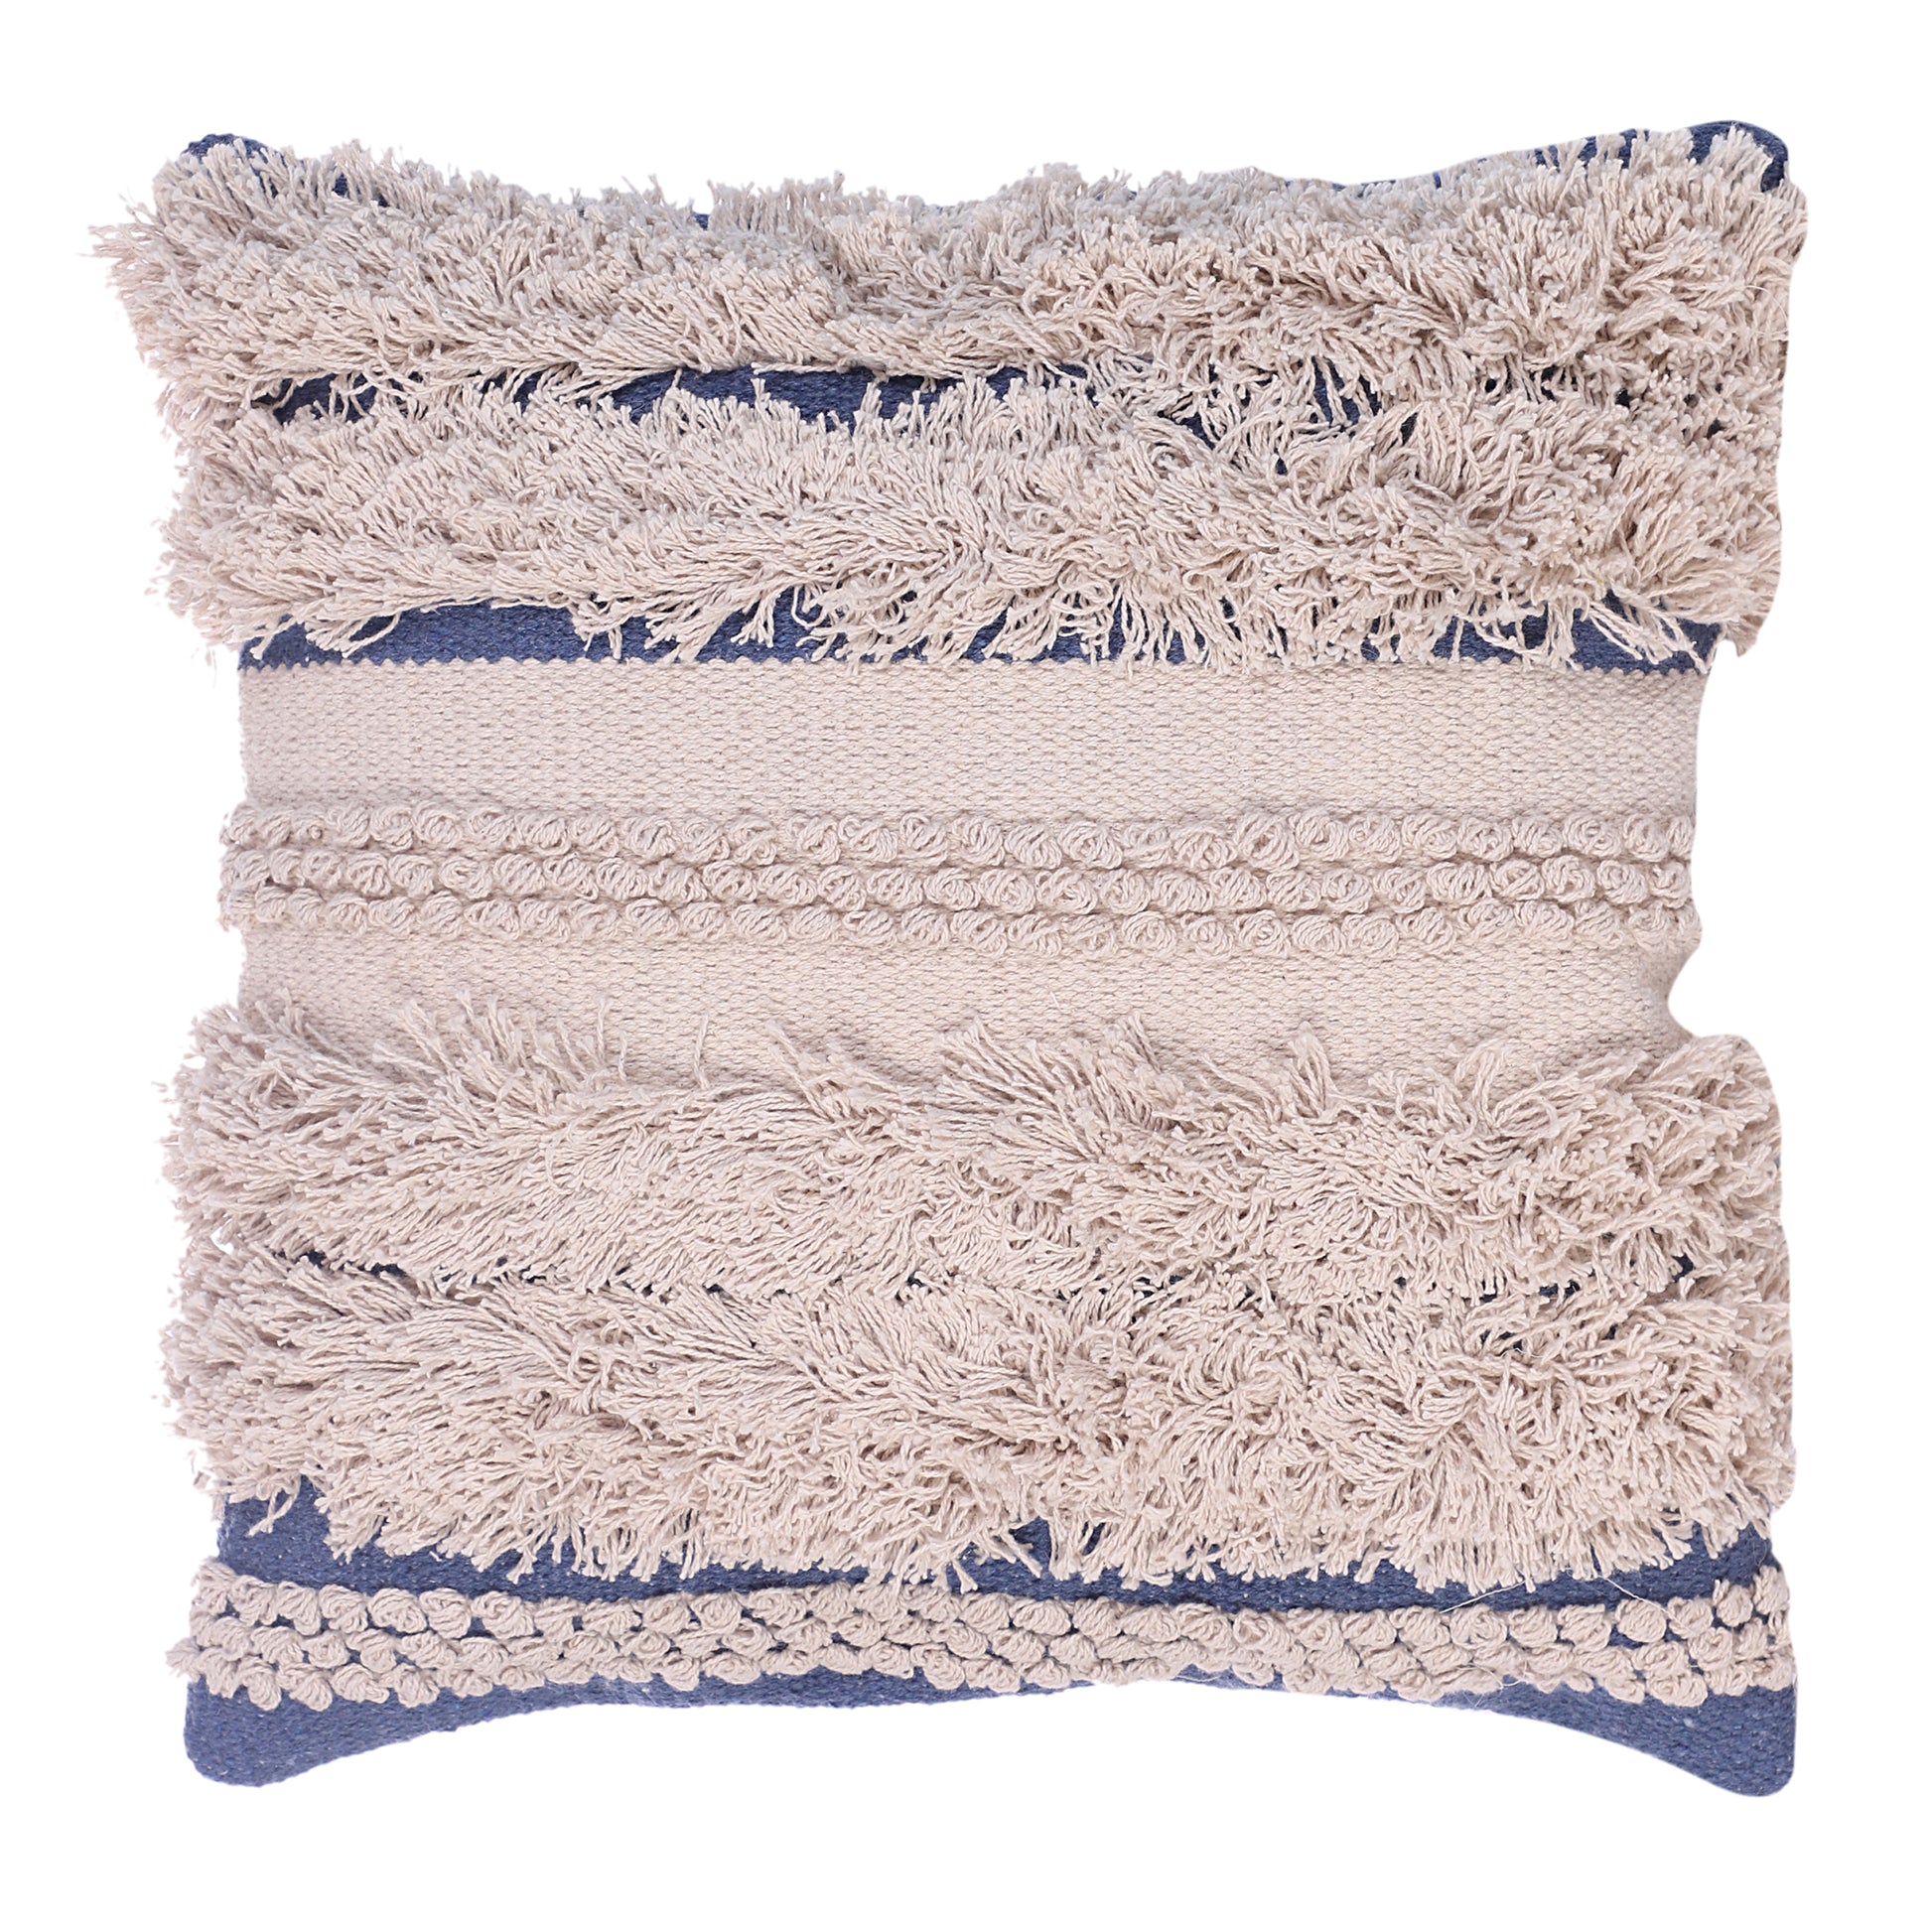 18 x 18 Handcrafted Shaggy Cotton Accent Throw